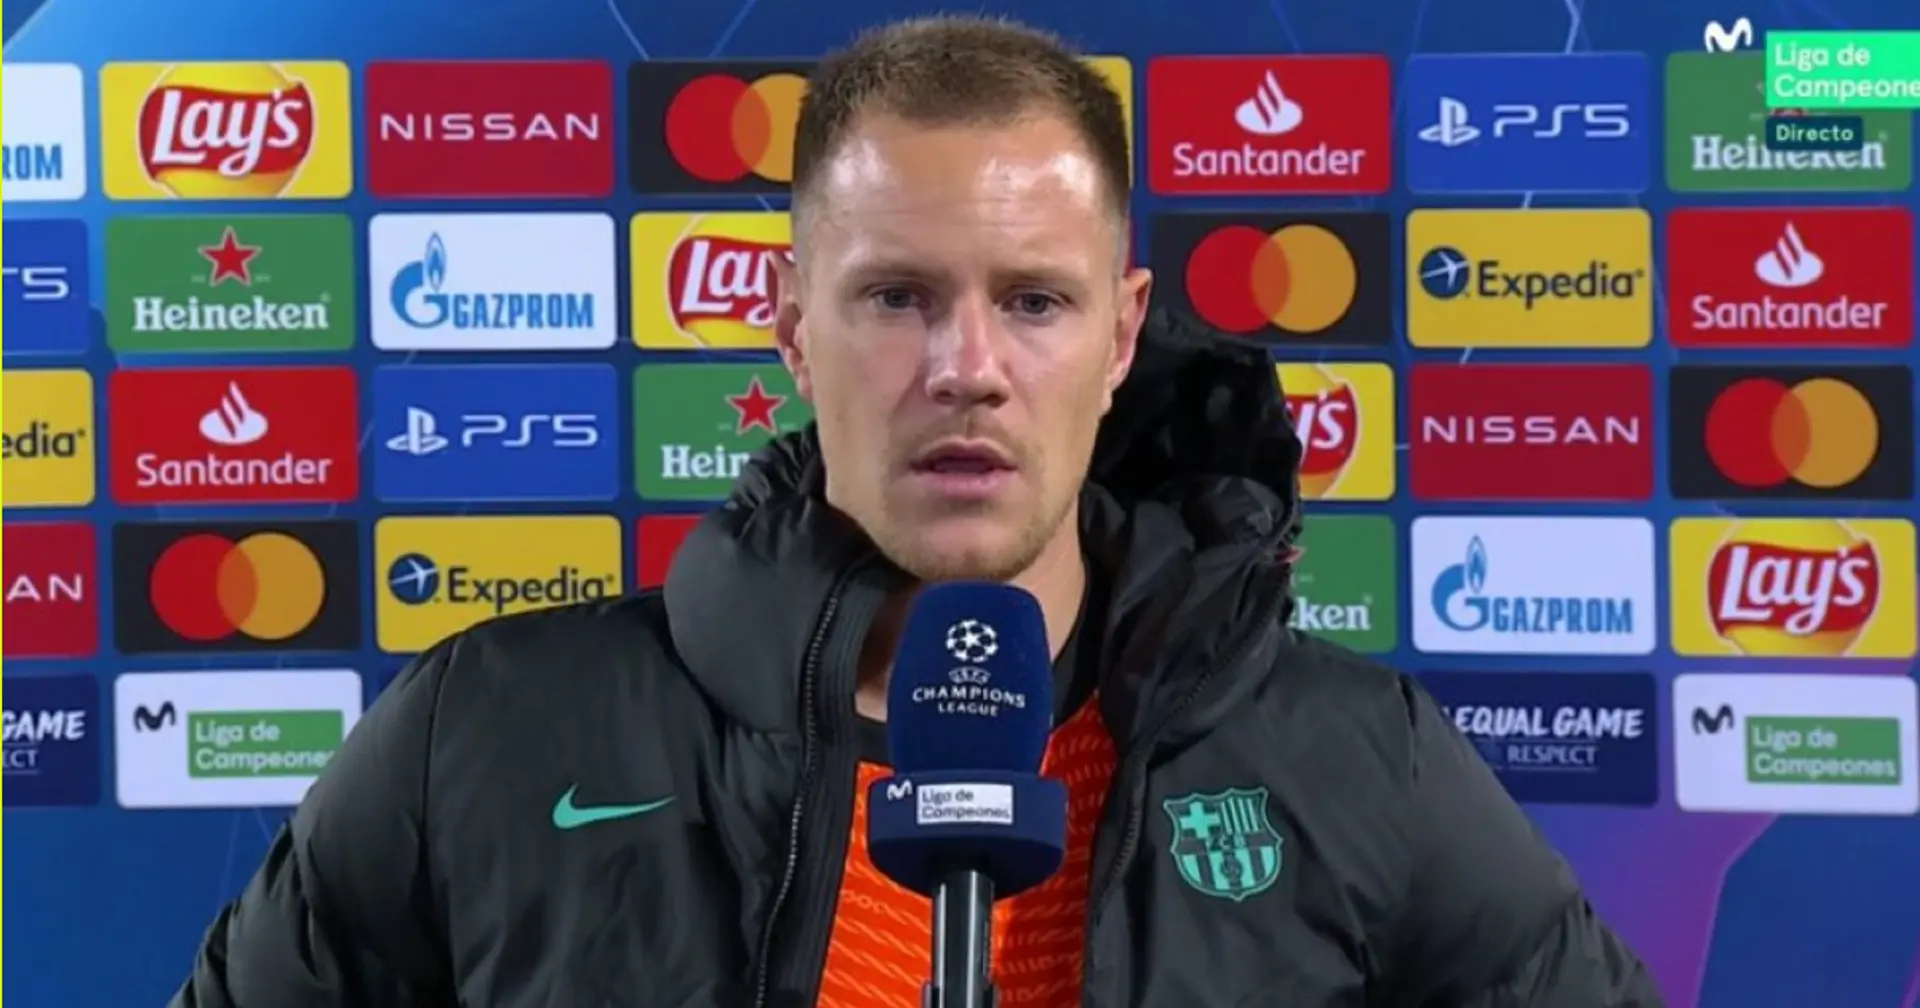 Ter Stegen clean sheet record since he joined Barca — he already equalled last season's tally